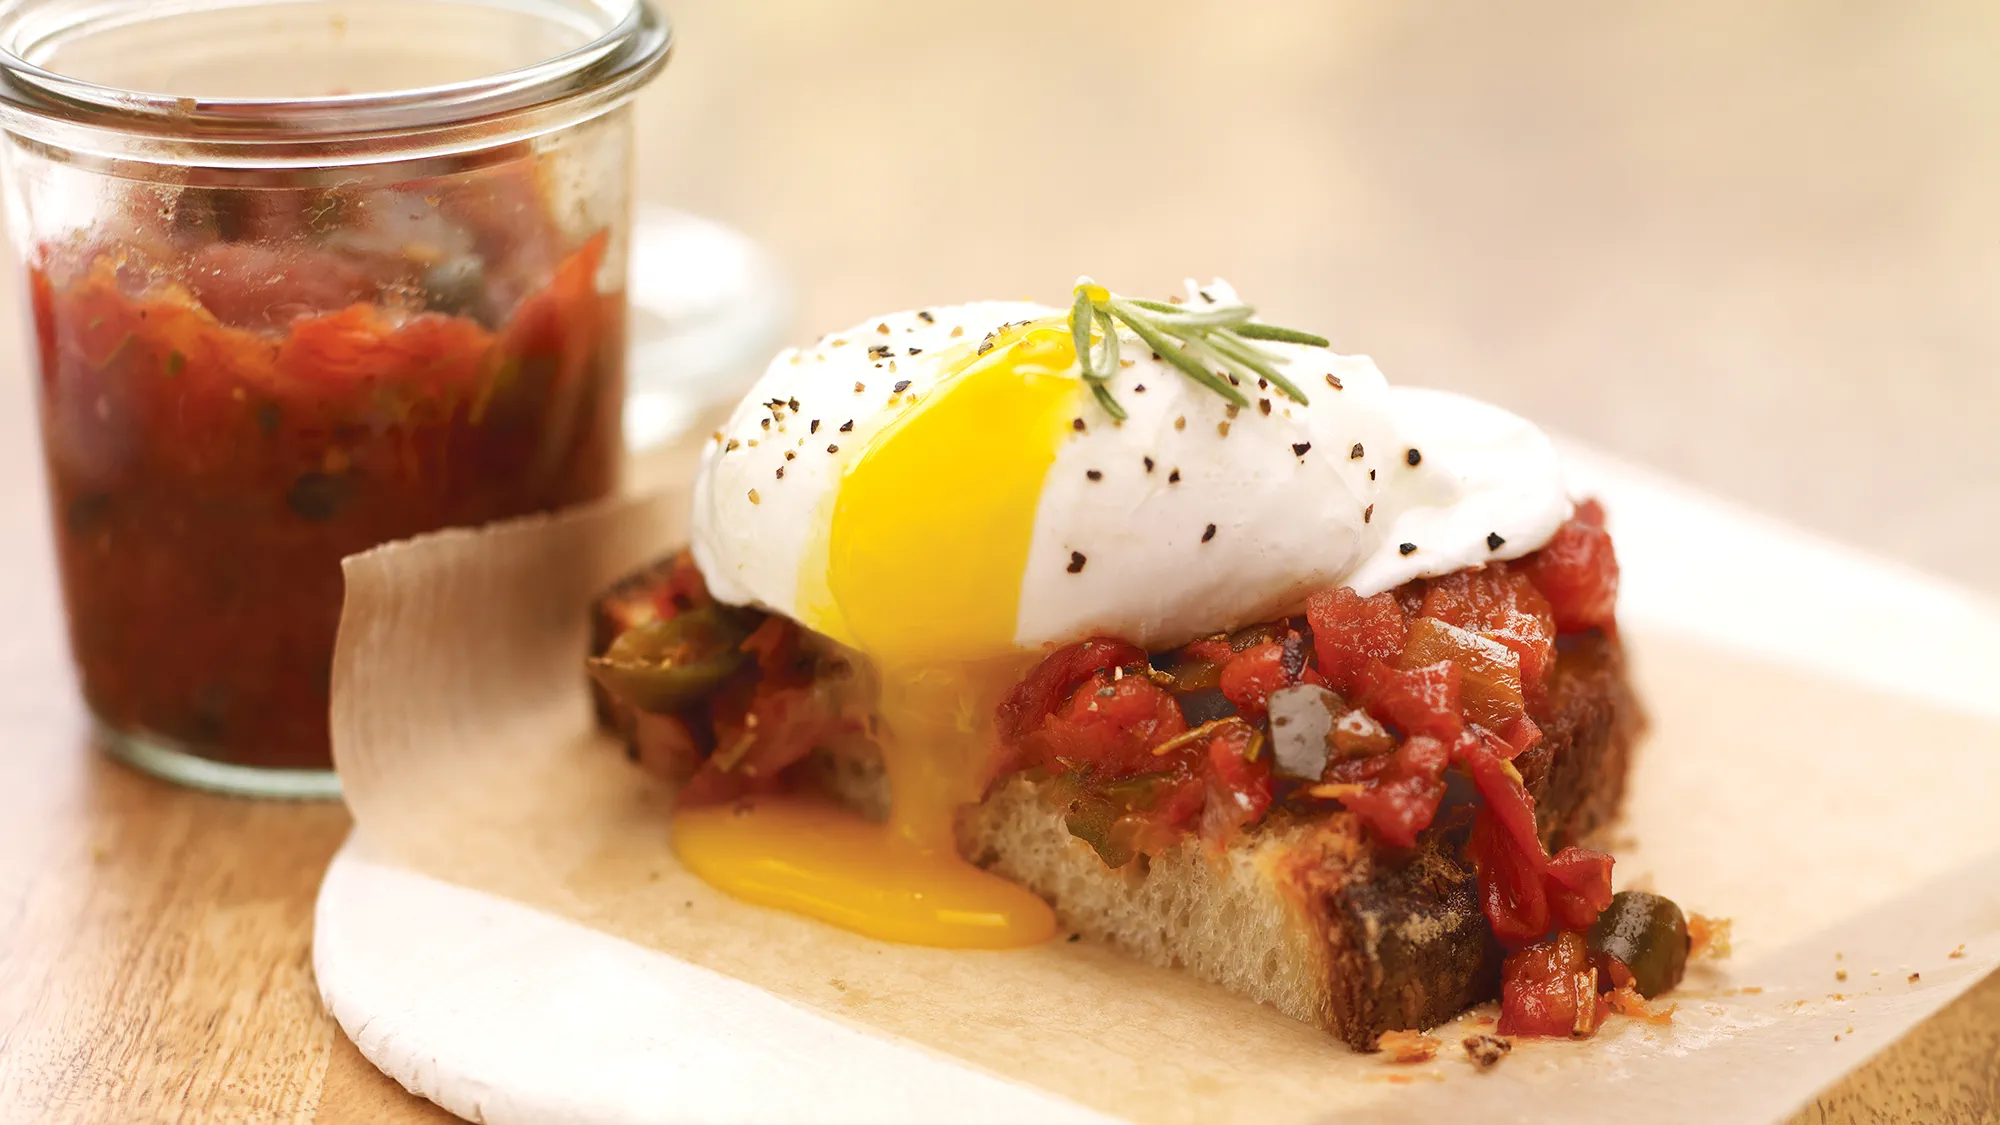 Rosemary Smoked Tomato Jam With Poached Egg